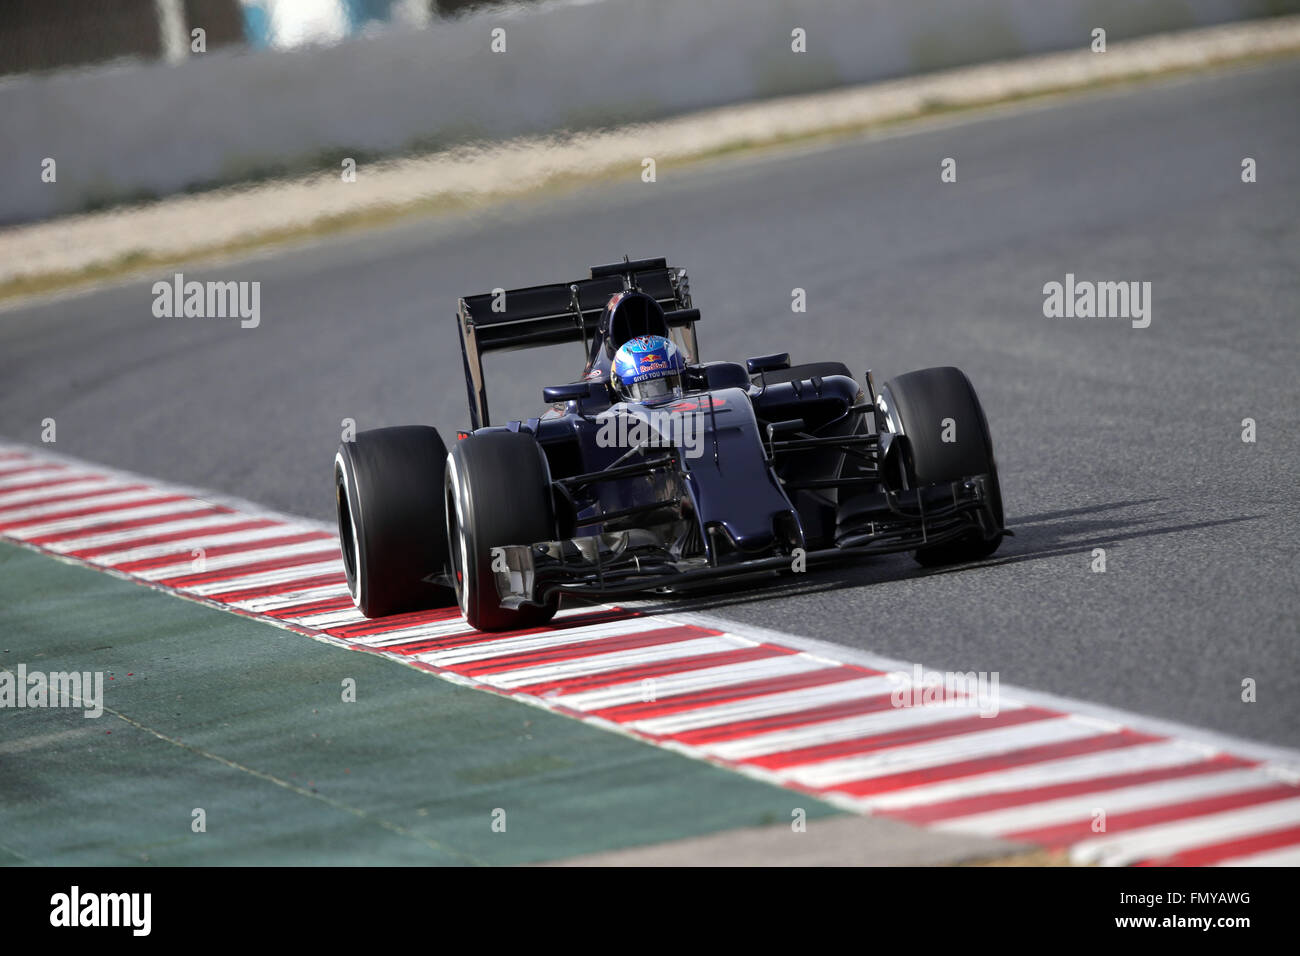 Dutch Formula One driver Max Verstappen of Toro Rosso steers his car during the training session for the upcoming Formula One season at the Circuit de Barcelona - Catalunya in Barcelona, Spain, 23 February 2016. Photo: Jens Buettner/dpa Stock Photo